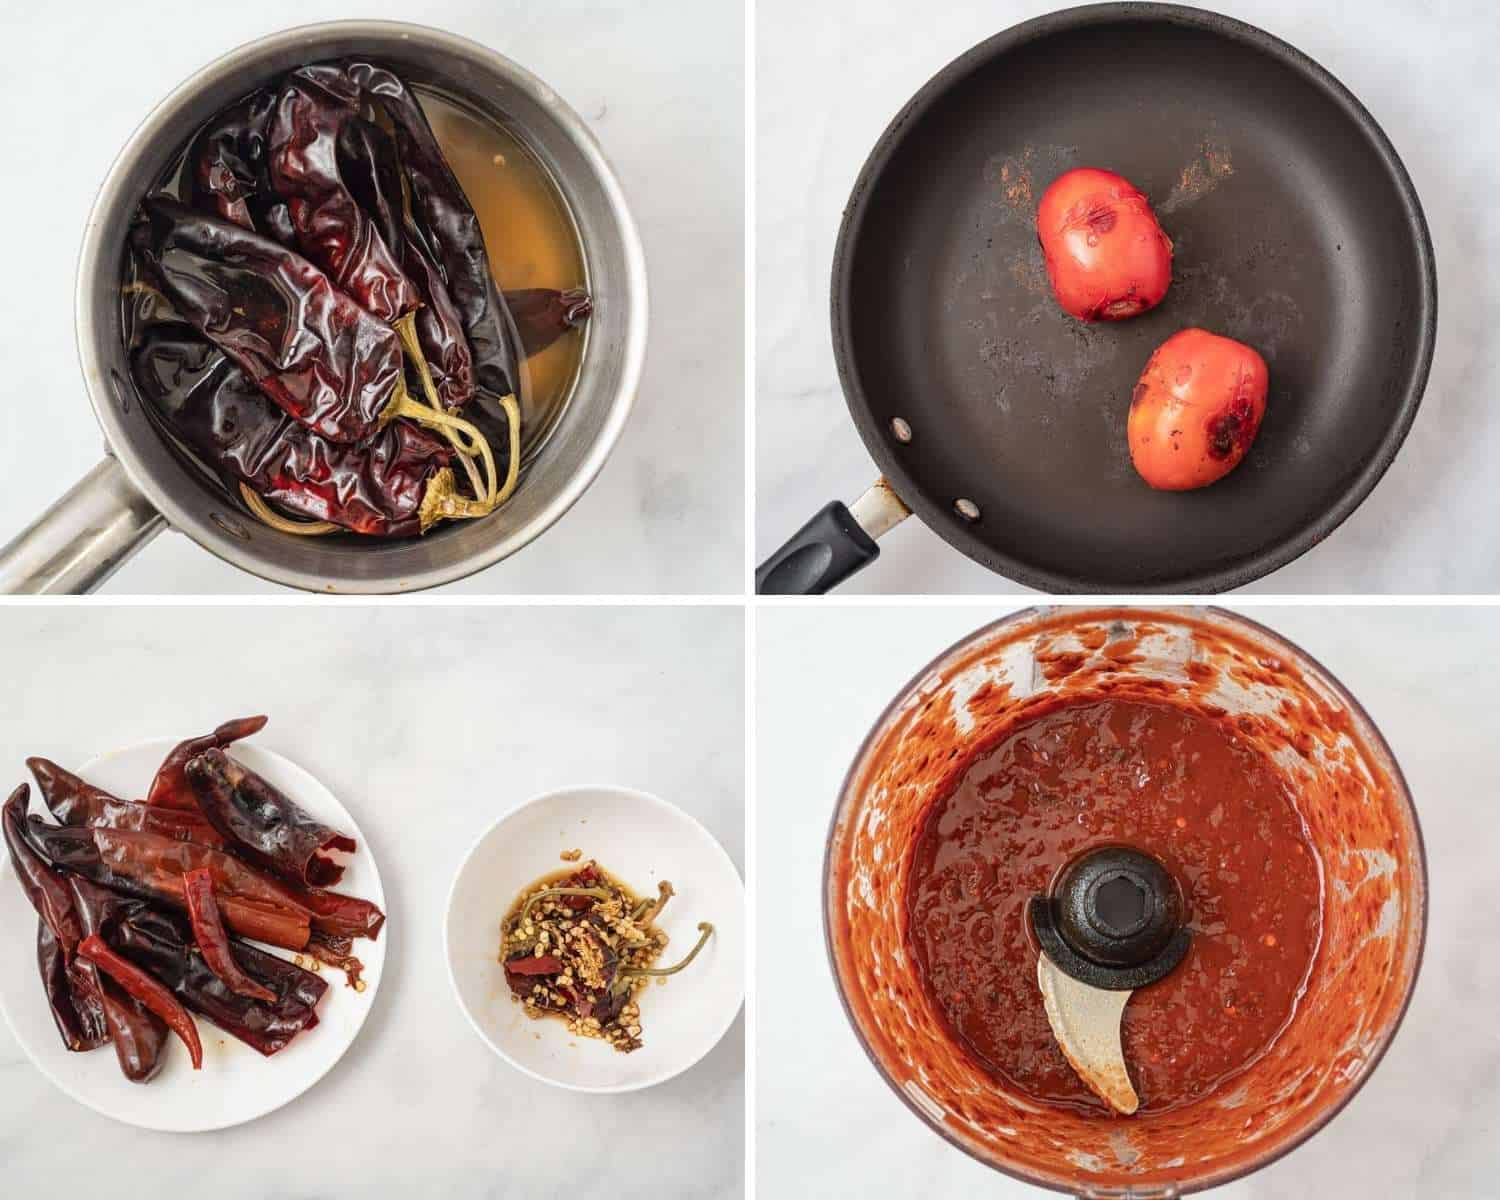 Collage of four images showing how to soak the chilies, roast tomatoes and make the marinade for chile colorado.